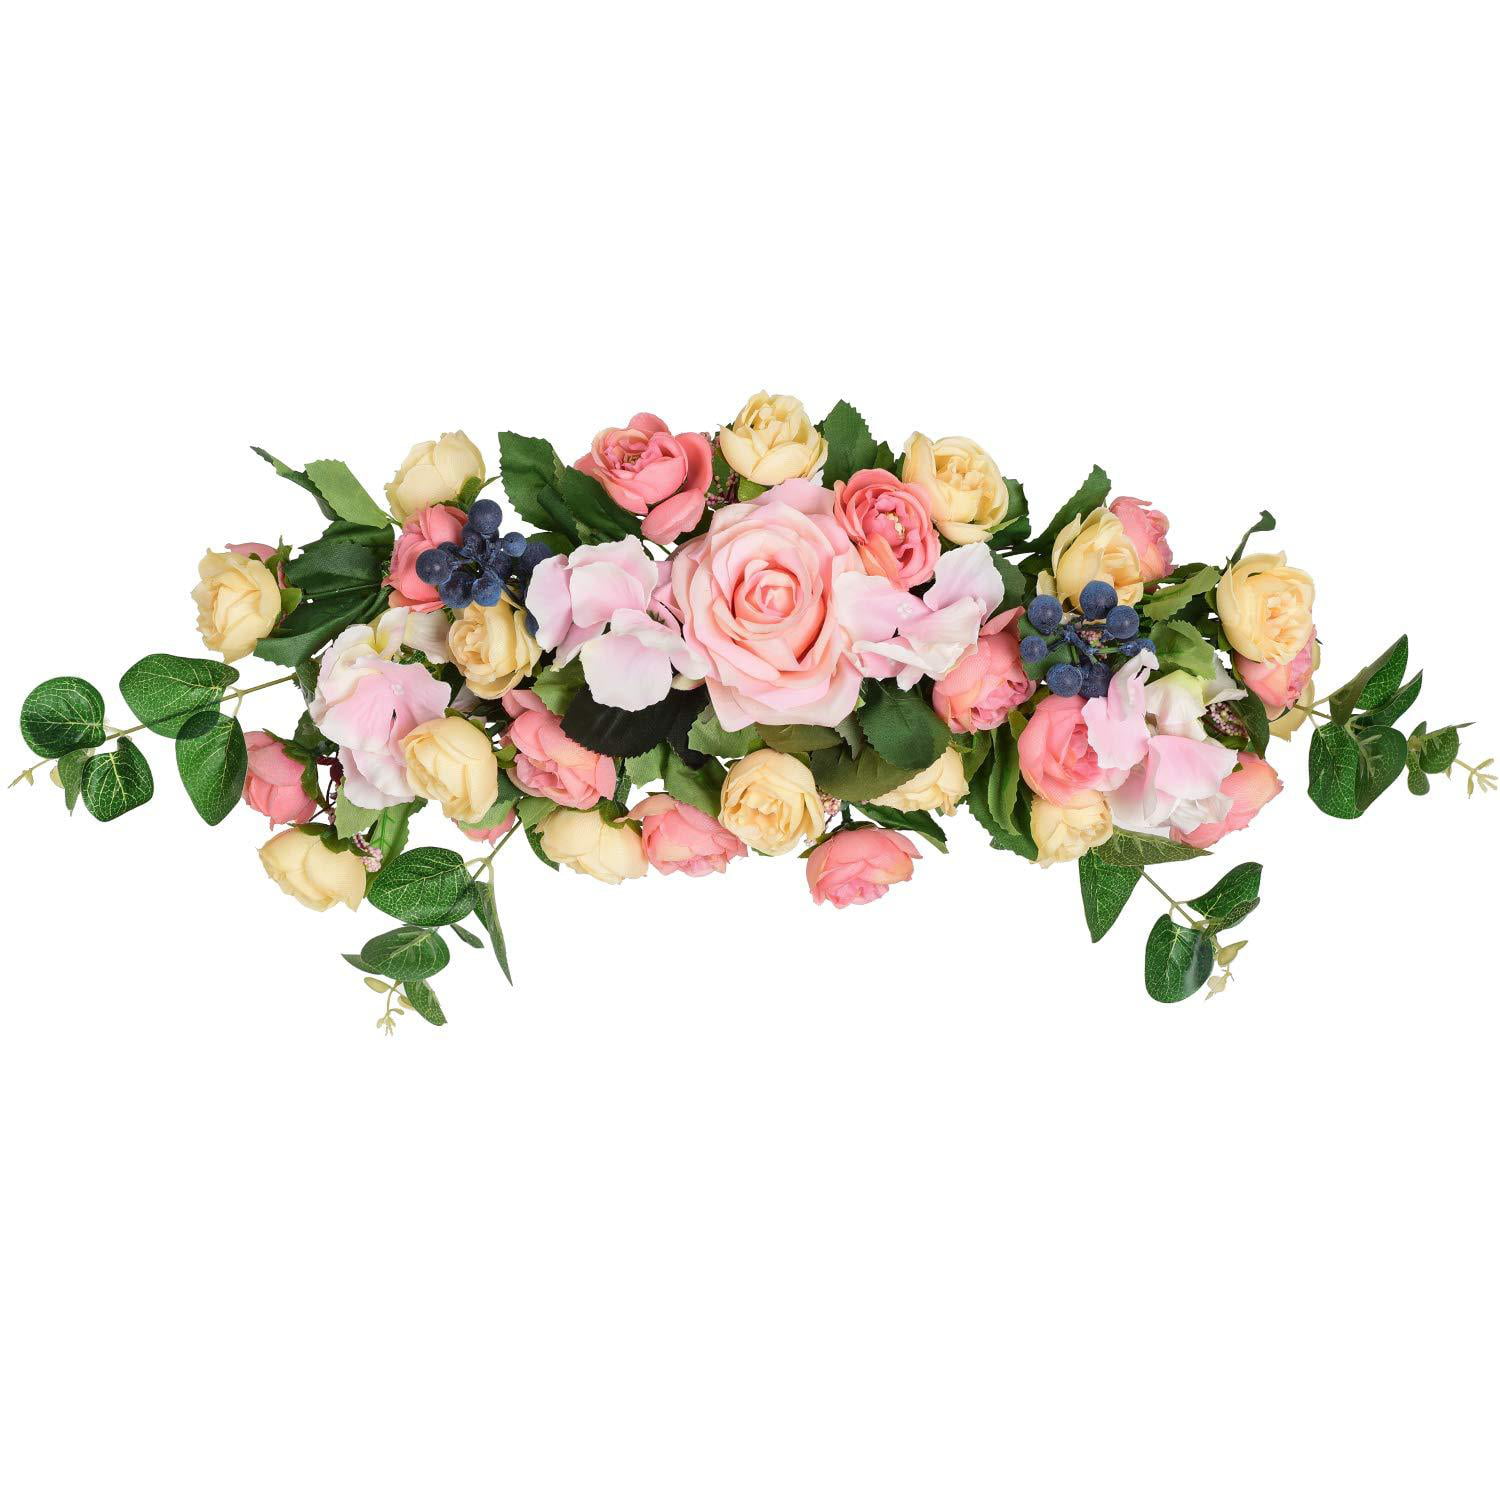 Wedding Artificial Peony with Green Leaves Swag Firlar 30 Inch Decorative Floral Swag Front Door Peony Floral Arch Garland Swag for Wedding Party Home Decor.